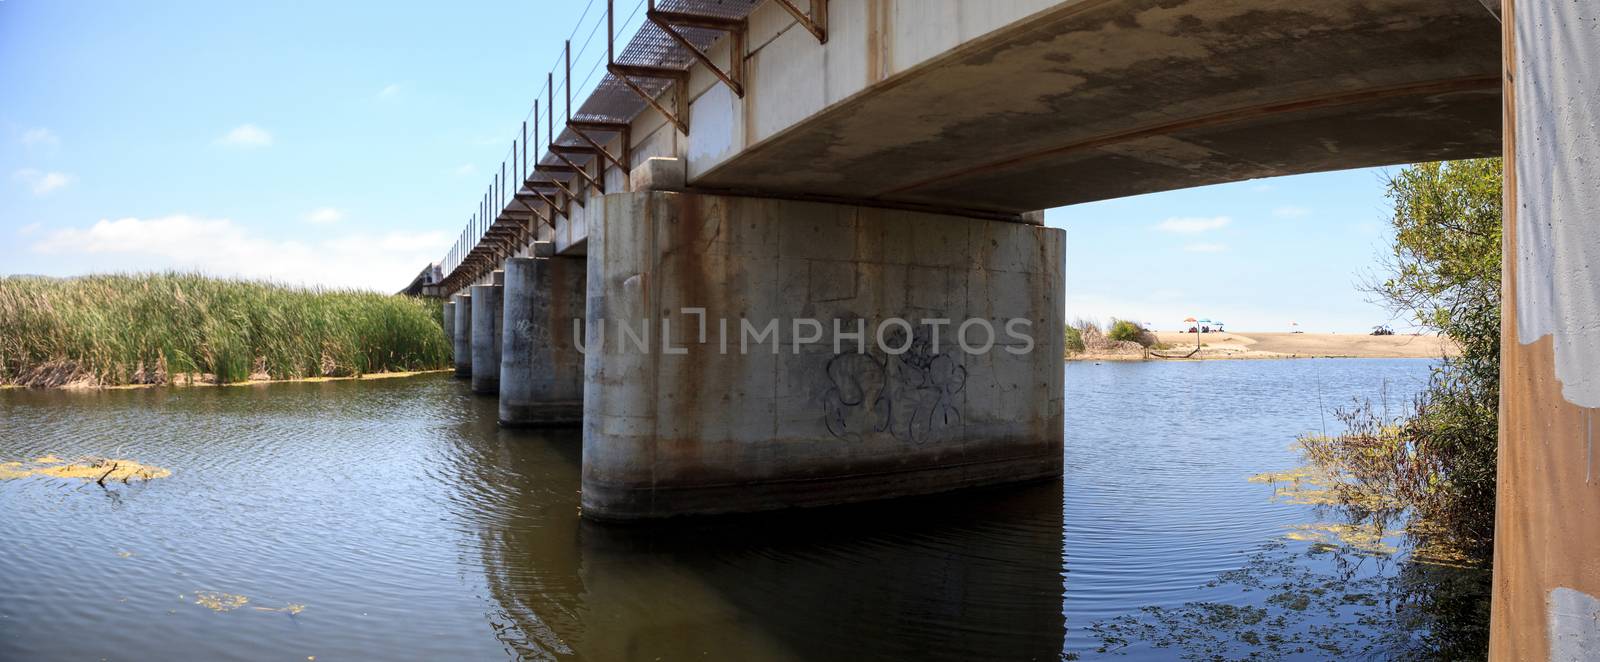 Water under the railroad track bridge leading down to the ocean at San Clemente State Beach in Summer in Southern California